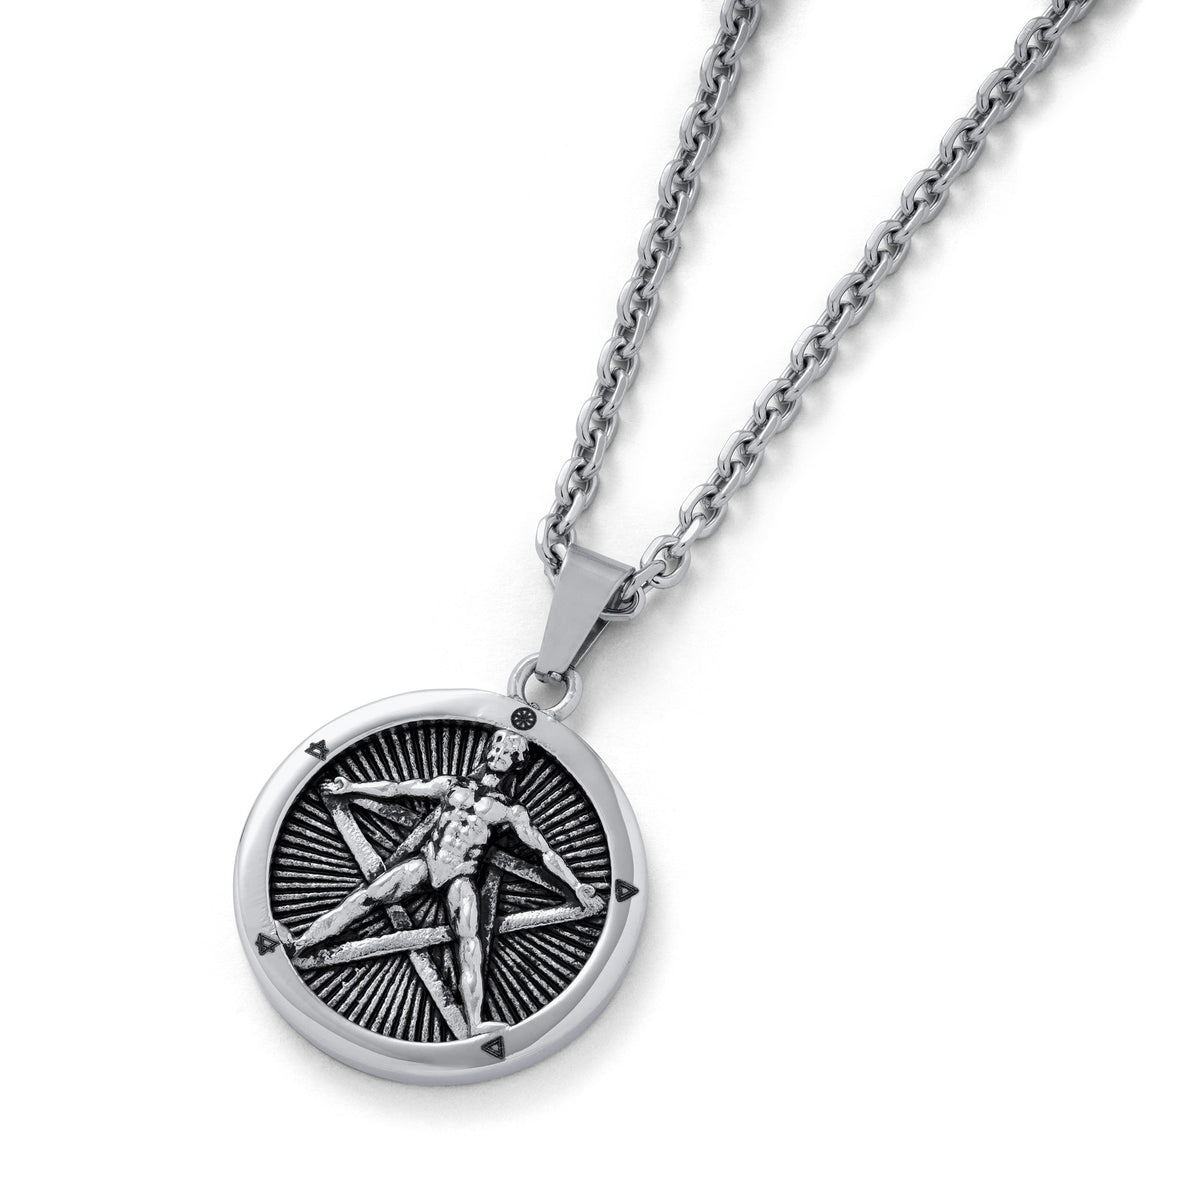 Pentagram Pendant Necklace by Statement Collective